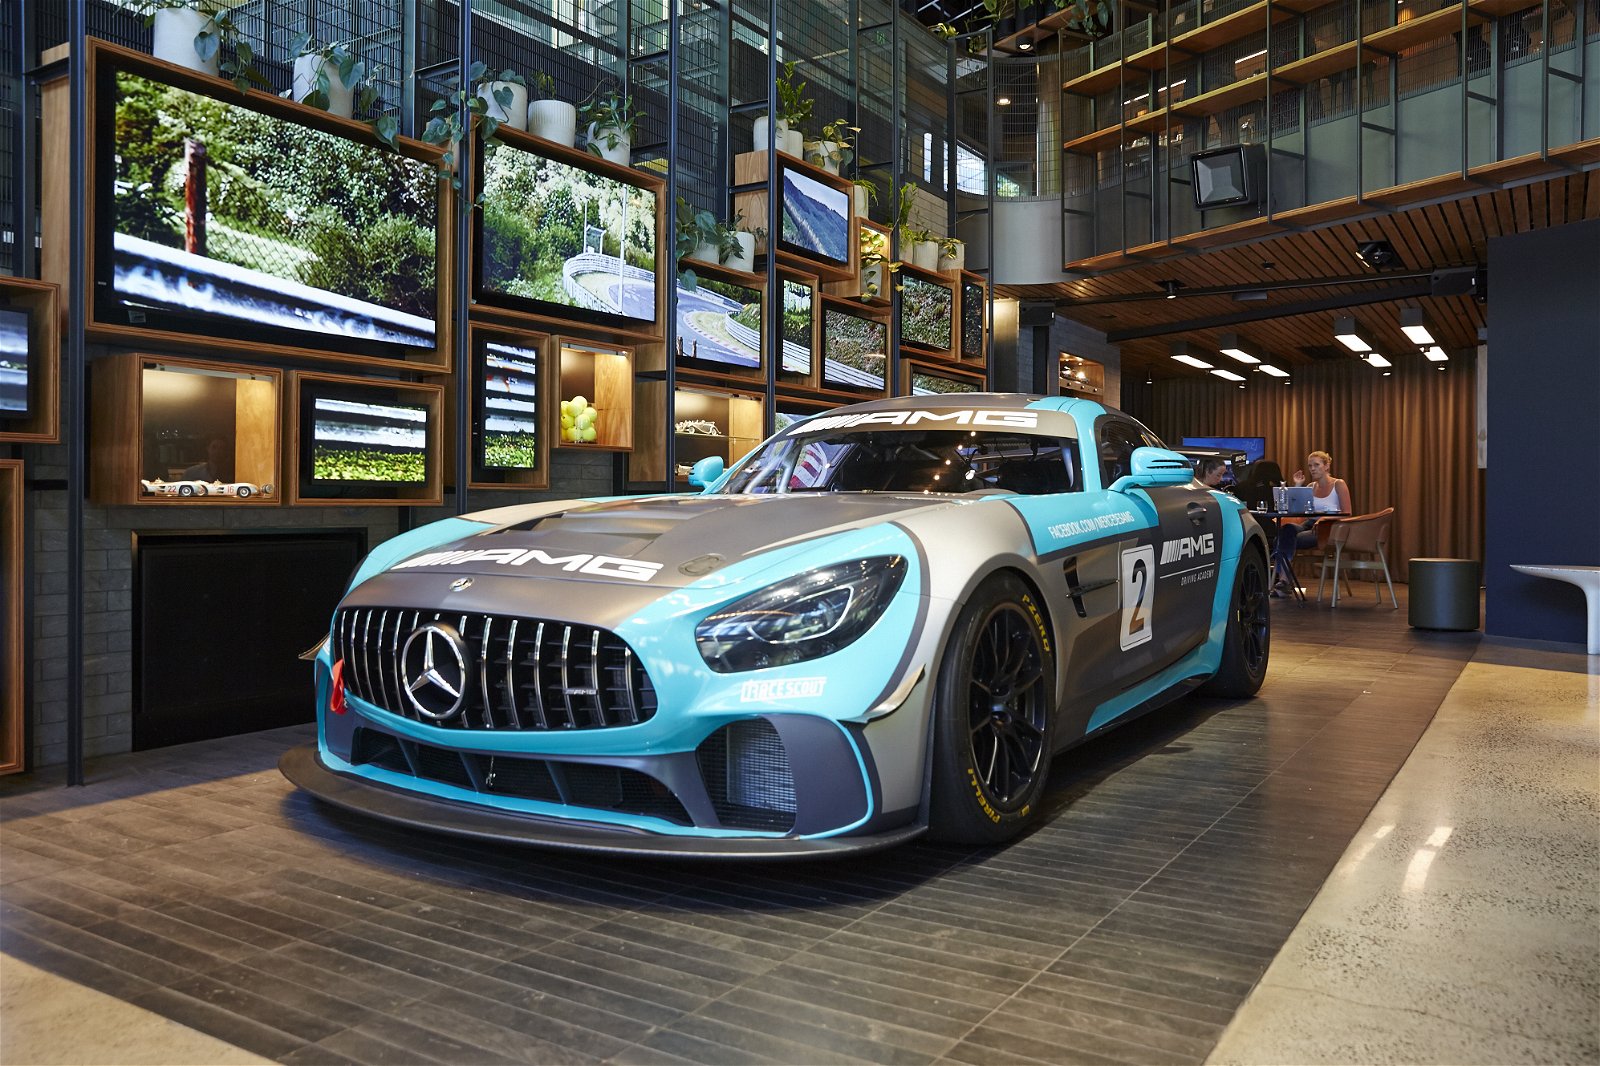 The Mercedes-AMG GT4